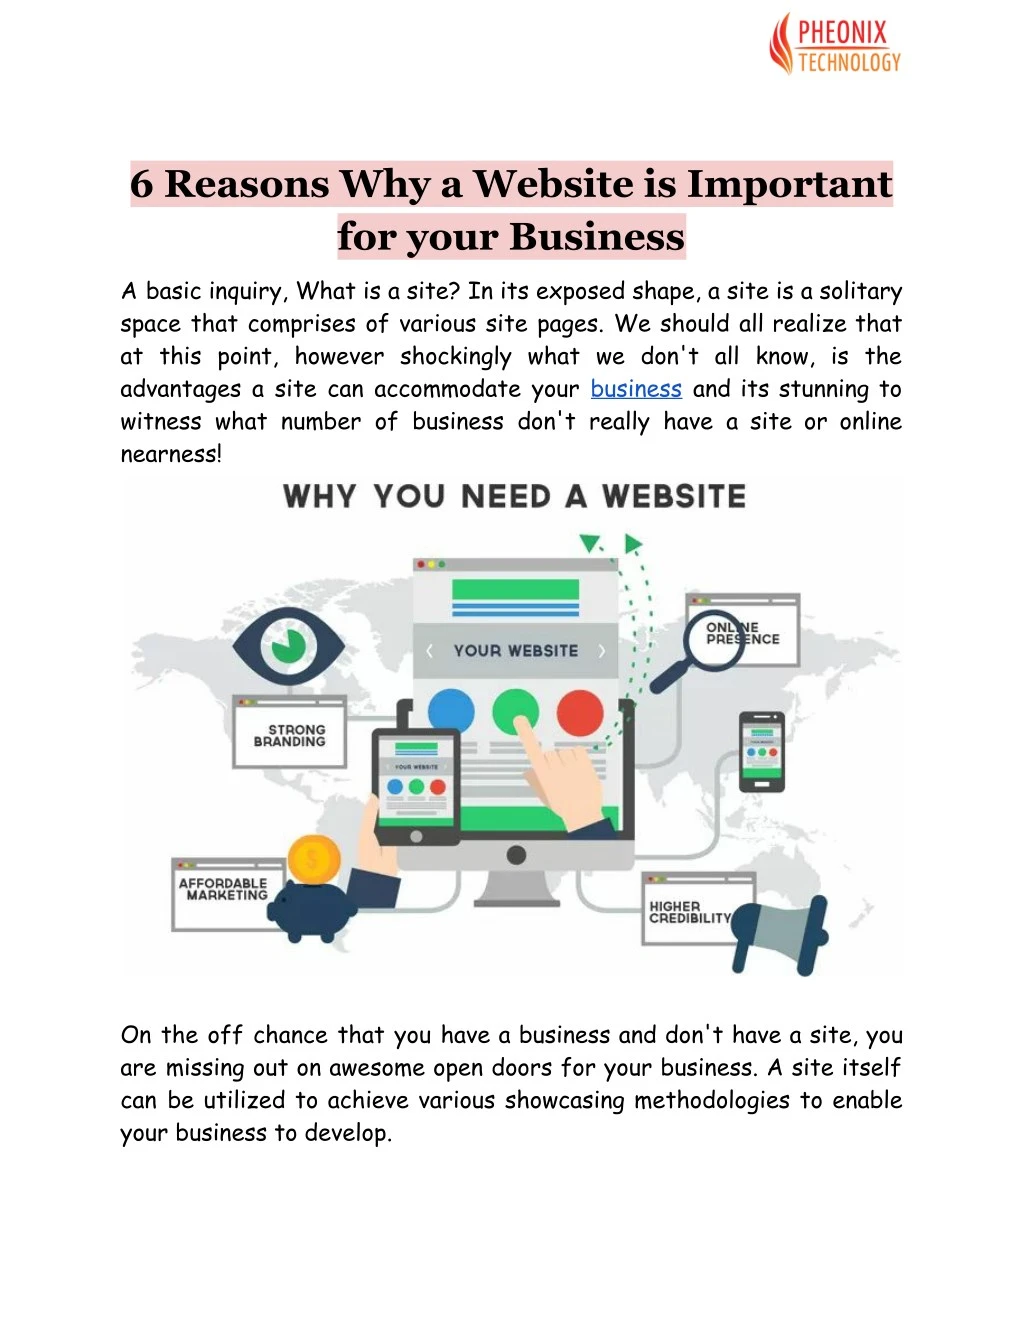 6 reasons why a website is important for your